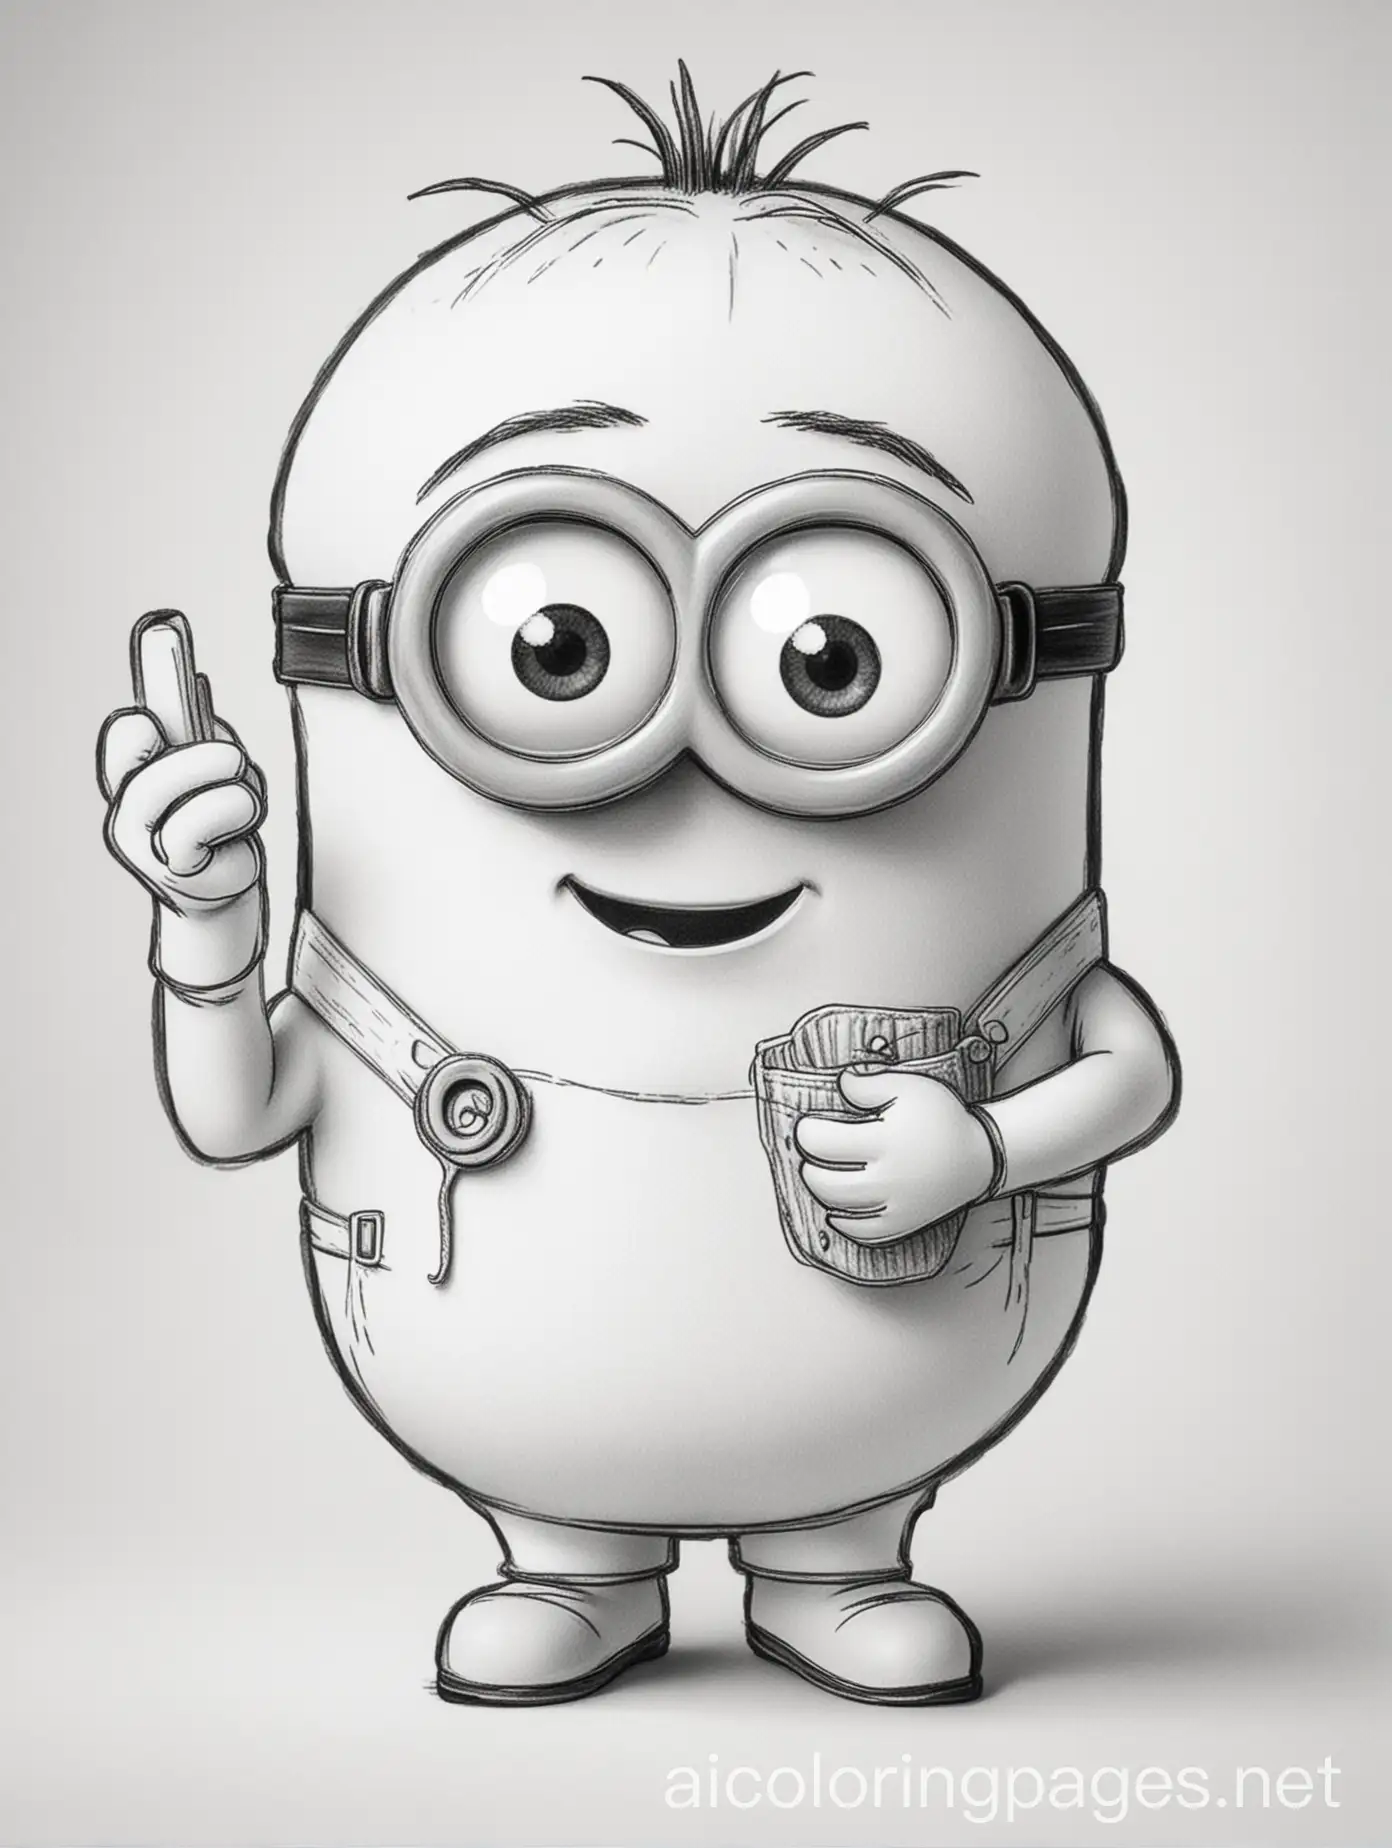 create a minion that eating a banana, Coloring Page, black and white, line art, white background, Simplicity, Ample White Space. The background of the coloring page is plain white to make it easy for young children to color within the lines. The outlines of all the subjects are easy to distinguish, making it simple for kids to color without too much difficulty